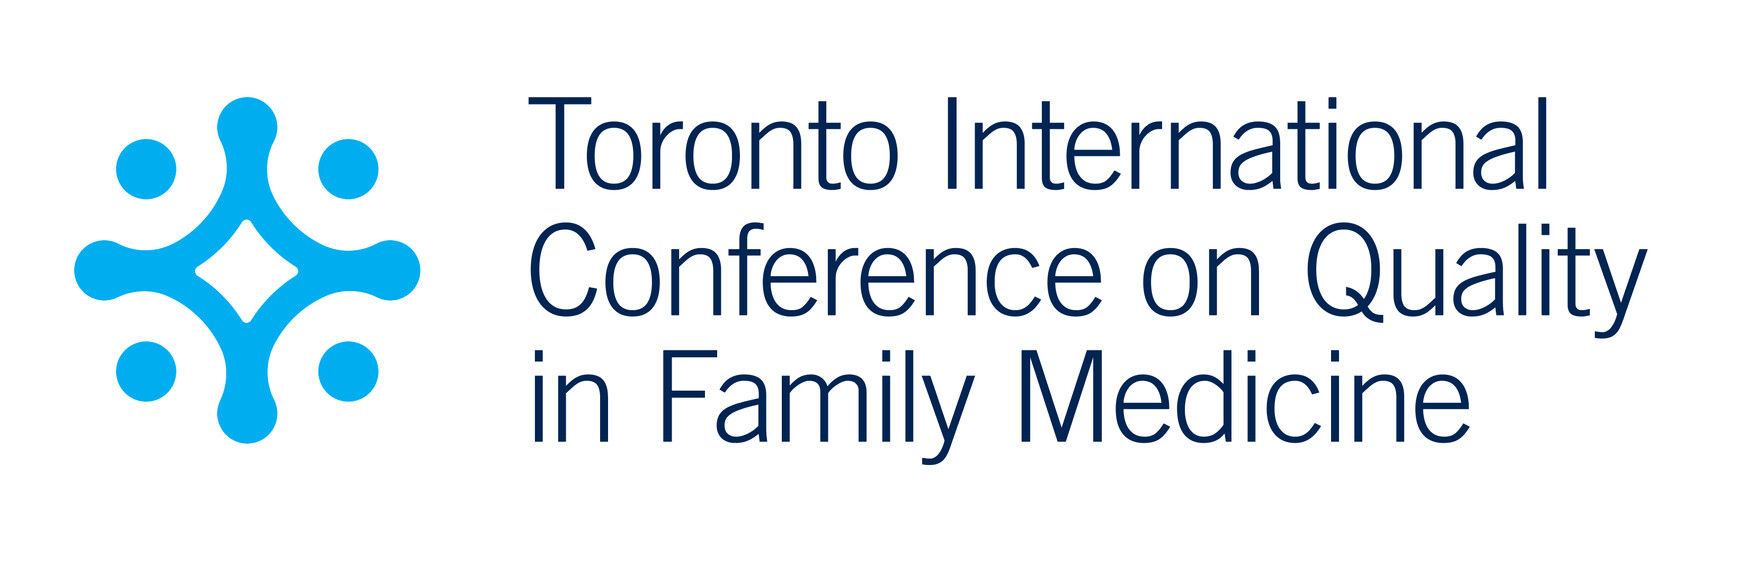 Toronto International Conference on Quality in Family Medicine Logo